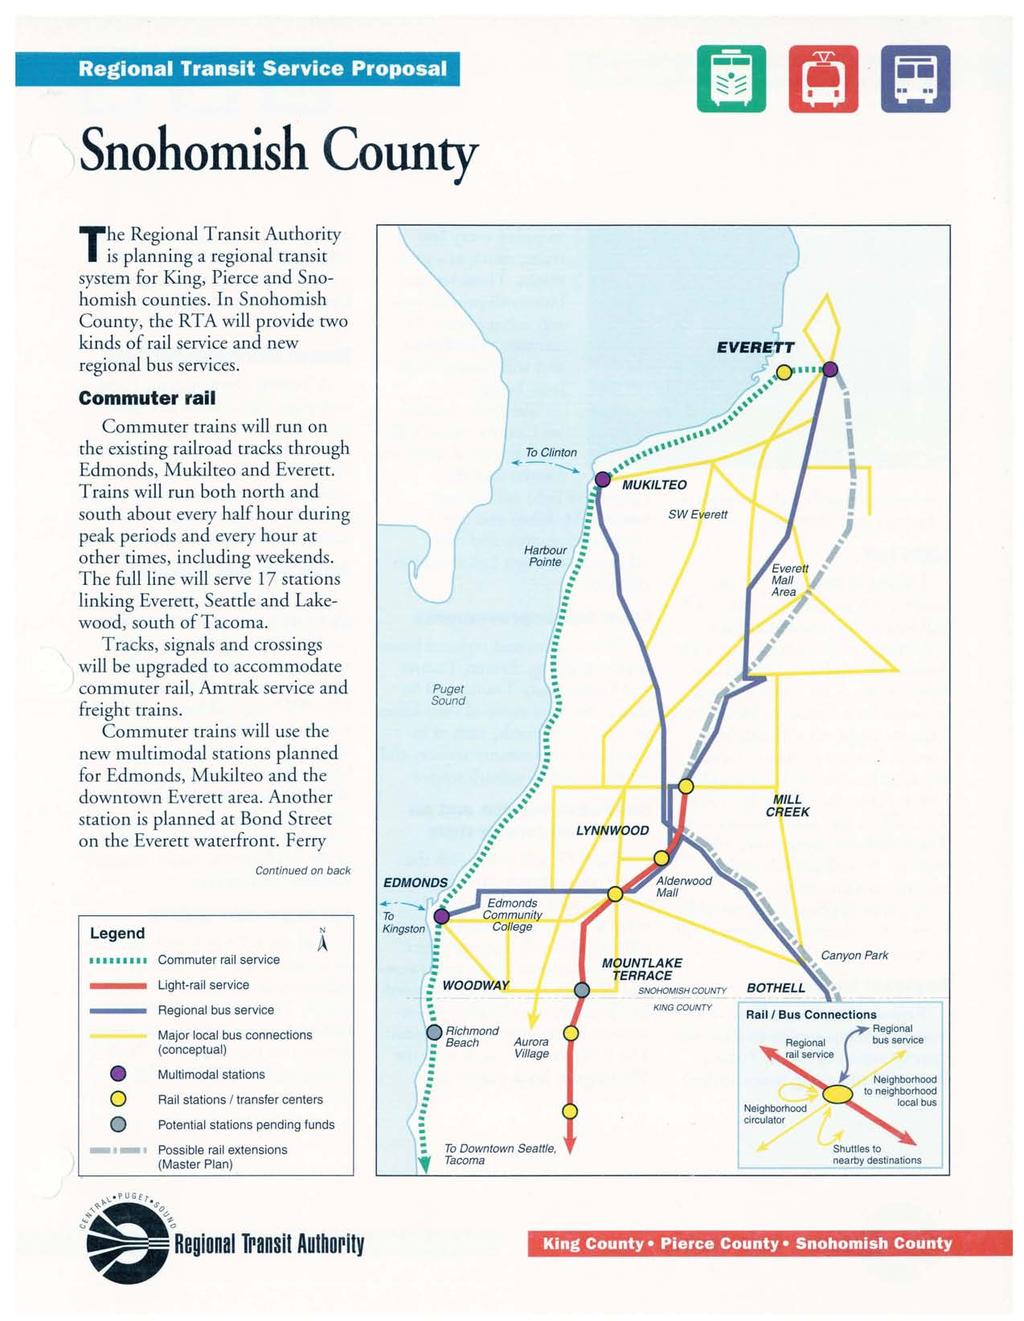 Regional Transit Service Proposal Snohomish County - ':::::~,,,,- The Regional Transit Authority is planning a regional transit system for King, Pierce and Snohomish counties.